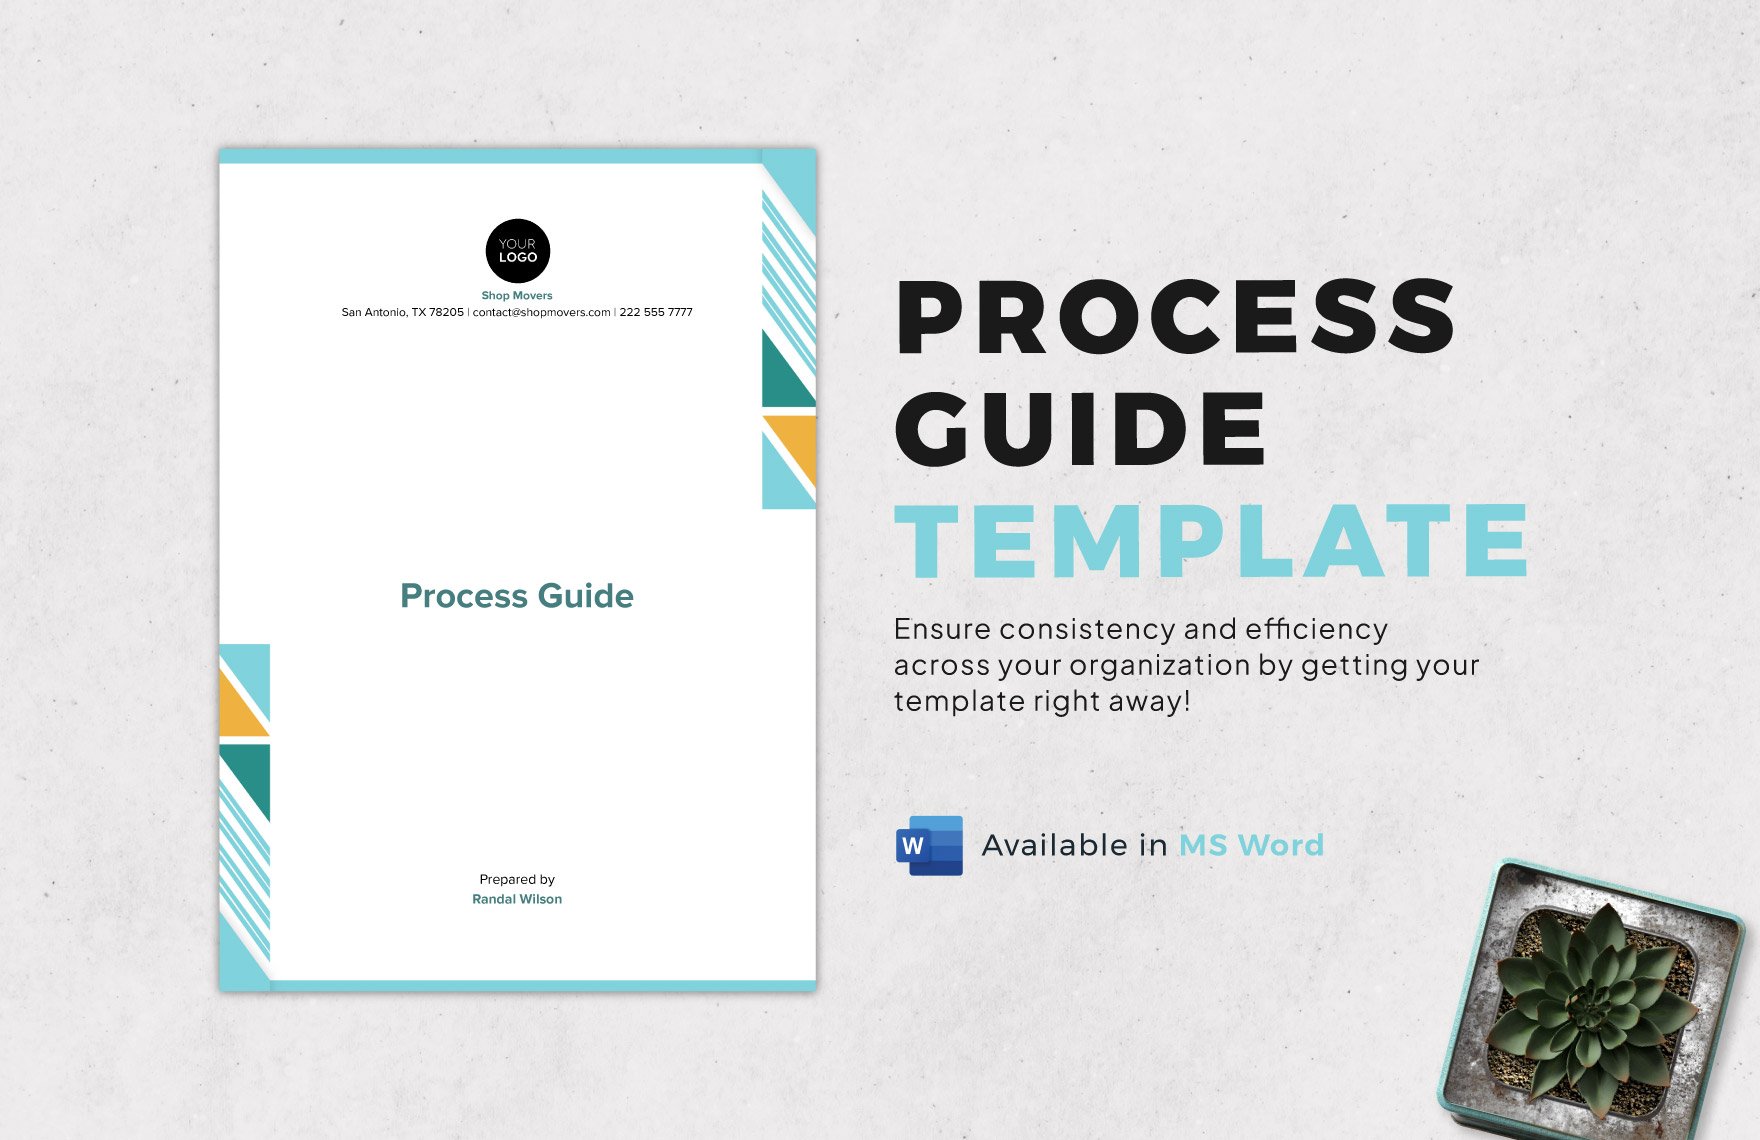 Process Guide Template in Word